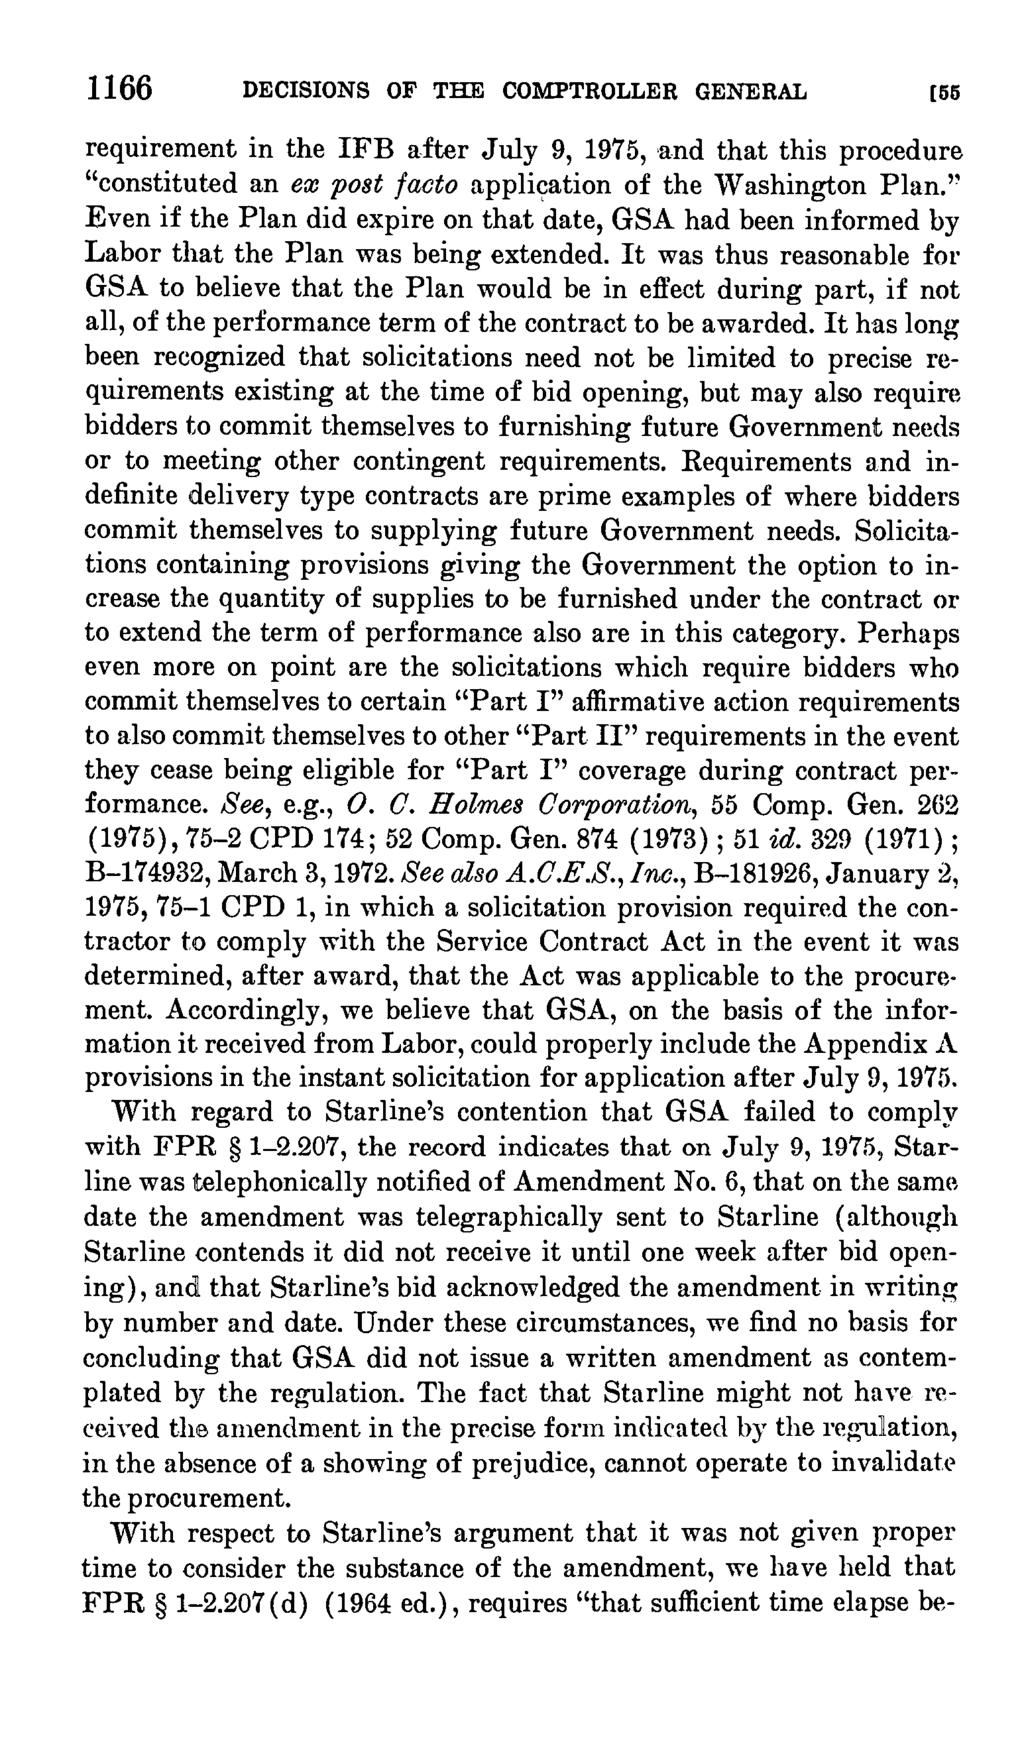 1166 DECISIONS OF THE COMPTROLLER GENERAL (55 requirement in the IFB after July 9, 1975, and that this procedure "constituted an ex post facto app1iation of the Washington Plan.